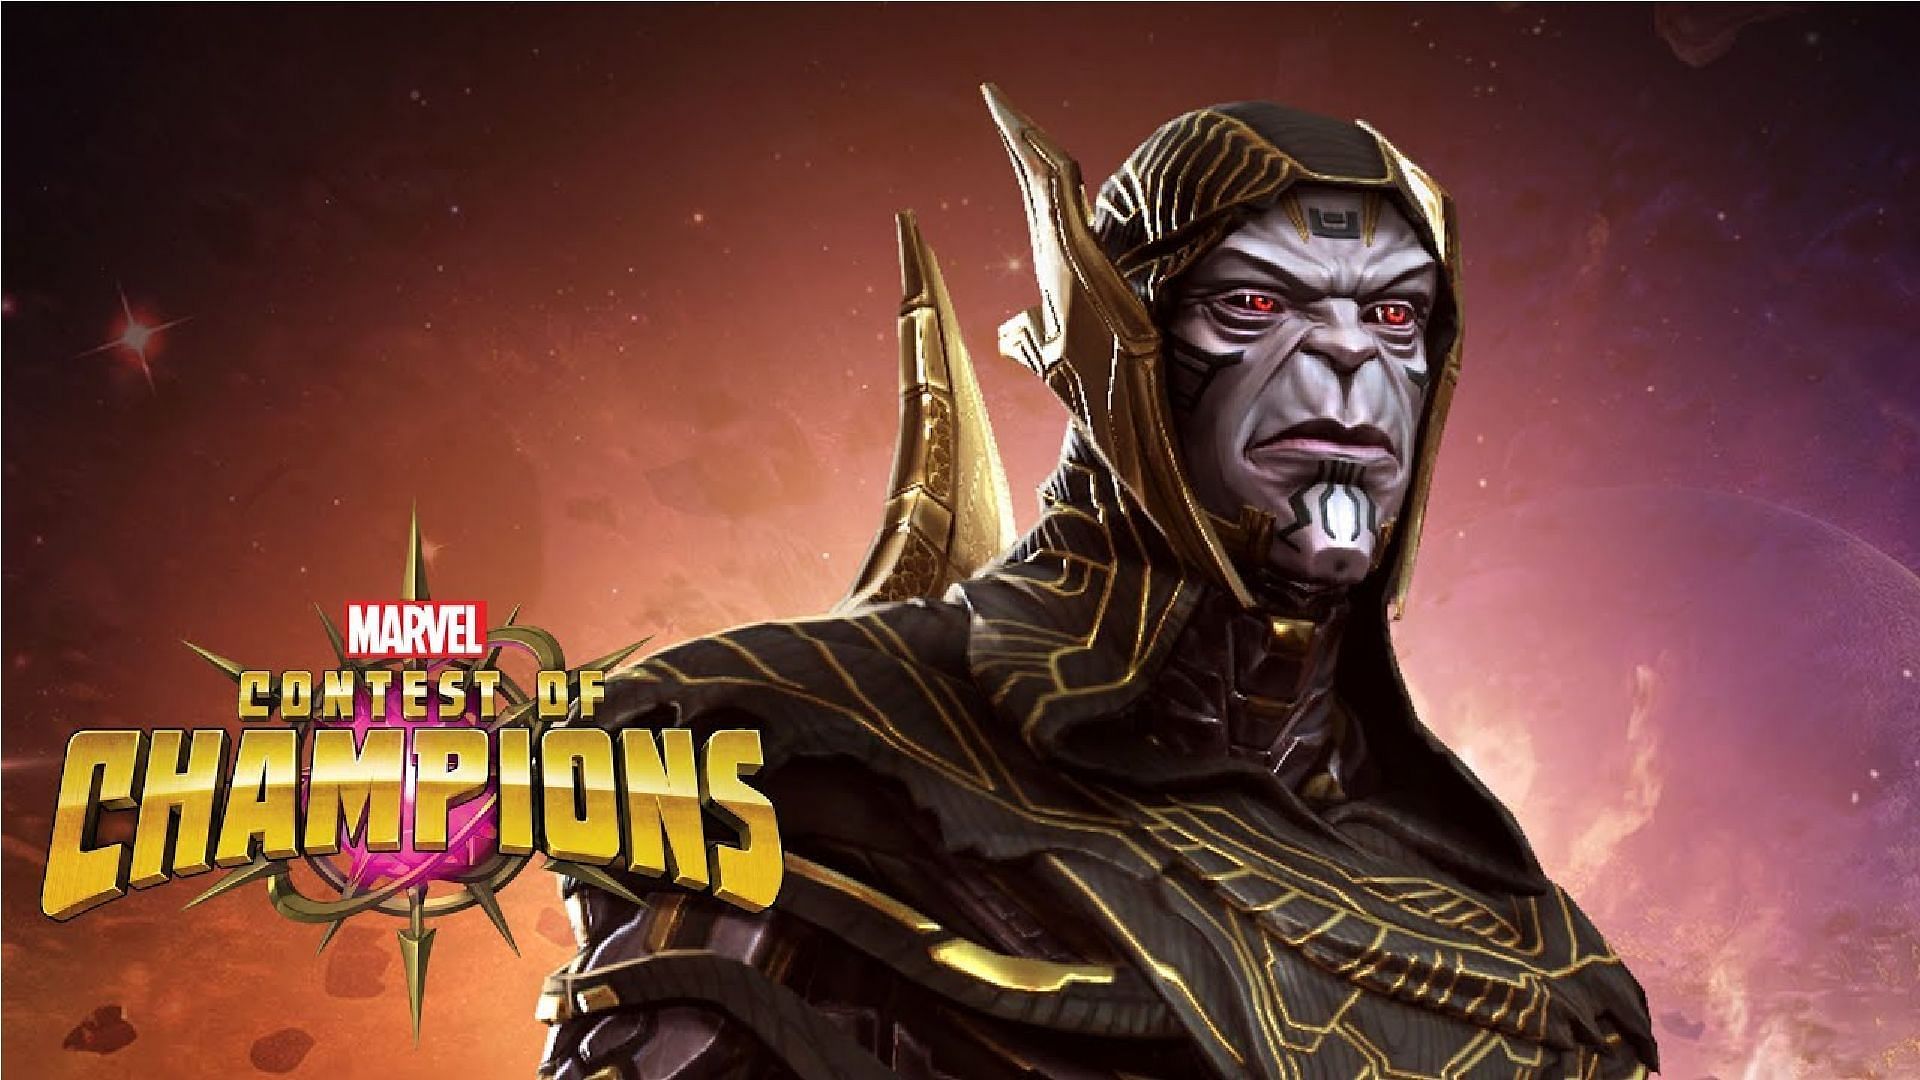 Corvus Glaive is an amazing Cosmic champion in Marvel Contest of Champions (Image via Kabam)